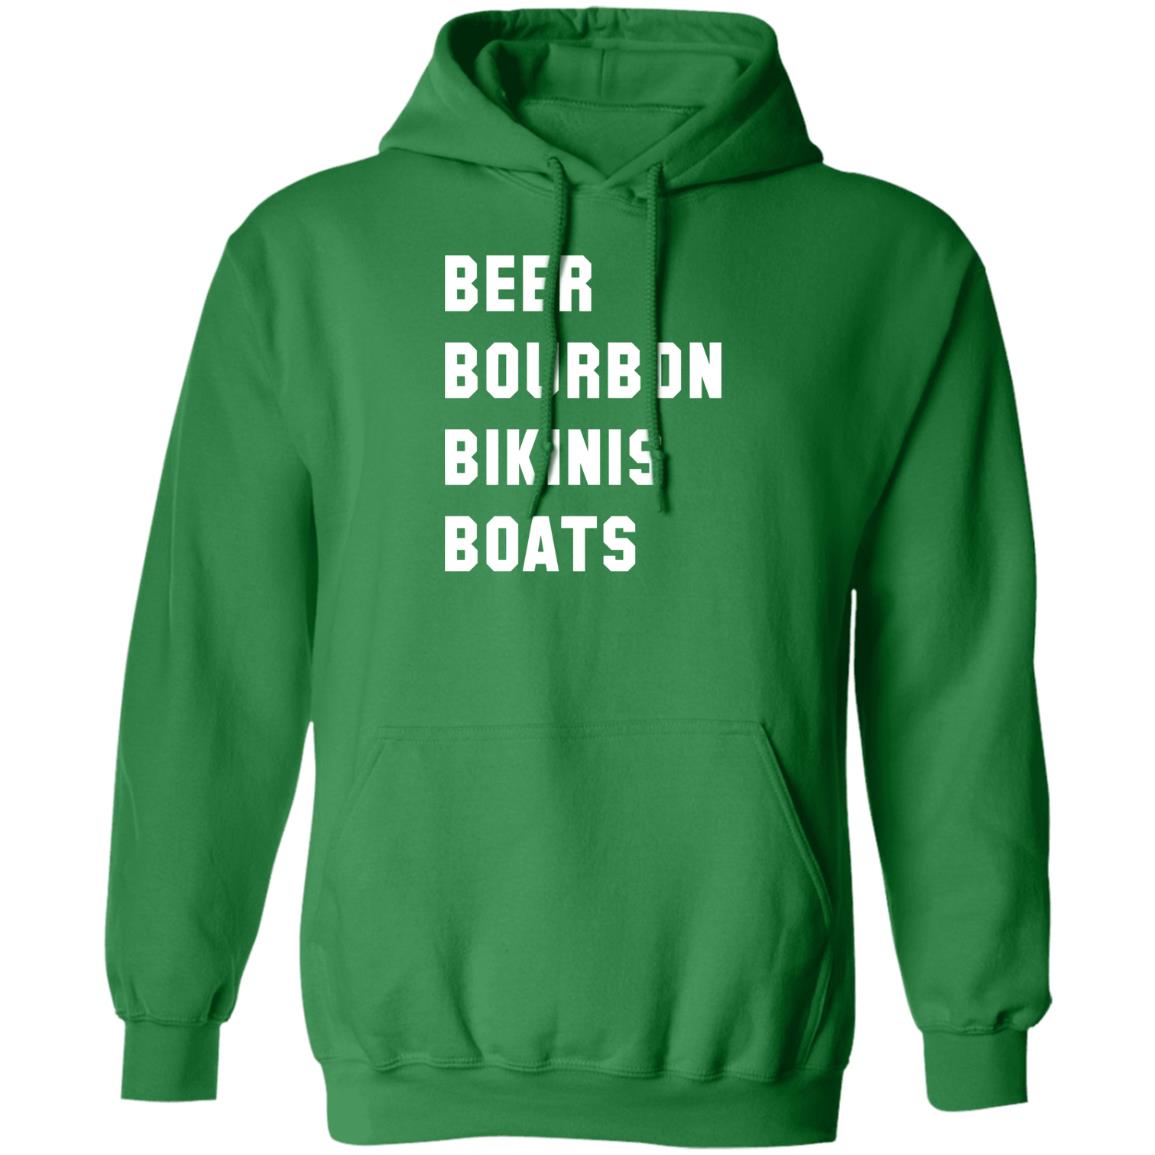 HRCL FL - Beer Bourbon Bikinis Boats - 2 Sided G185 Pullover Hoodie